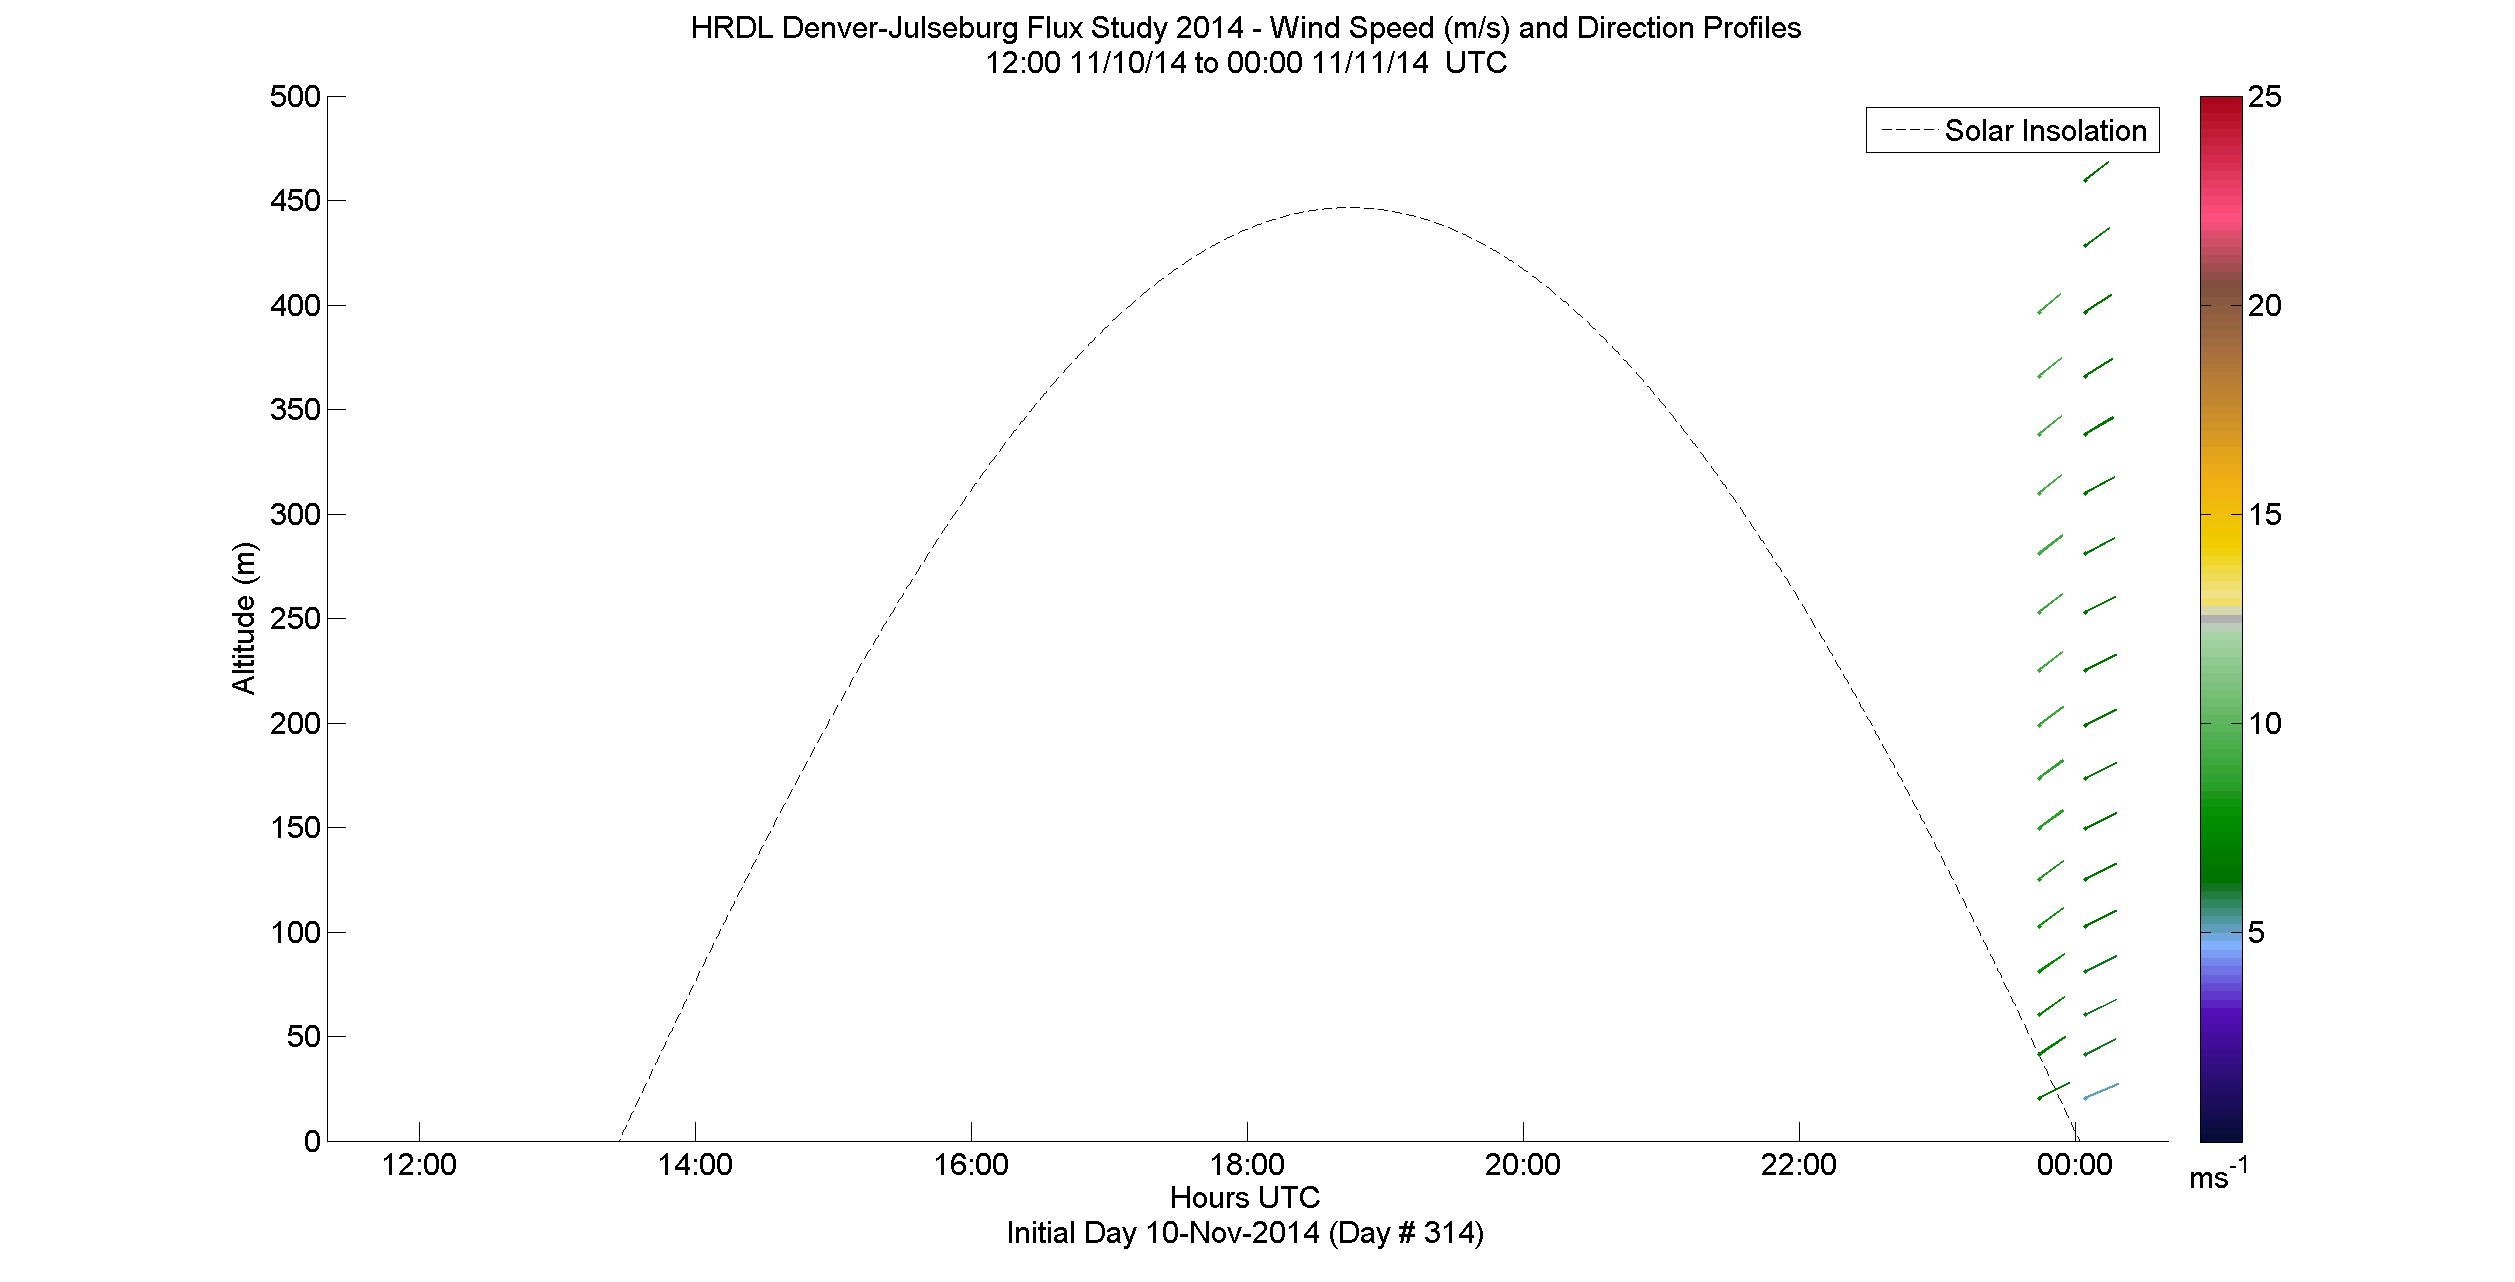 HRDL speed and direction profile - November 10 pm